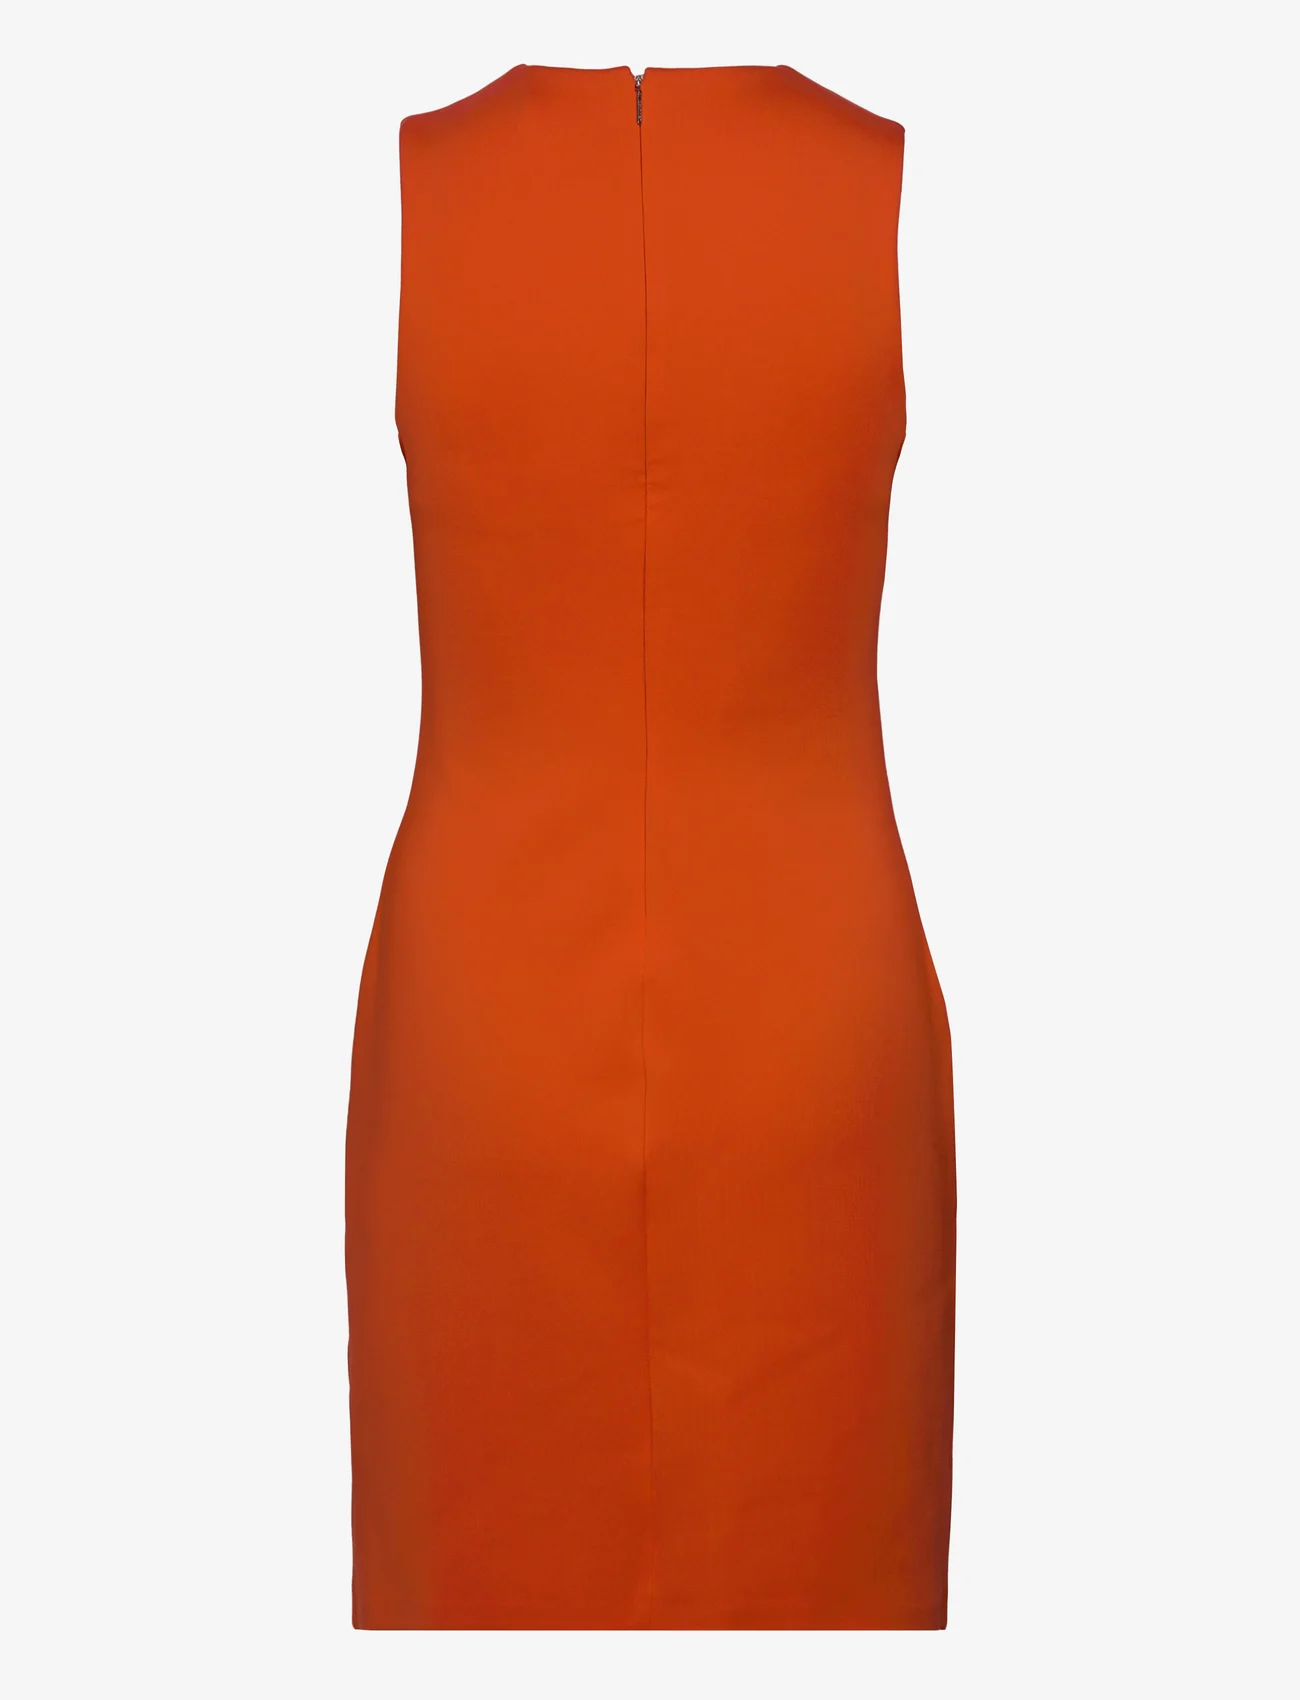 Calvin Klein - TECHNICAL KNIT MINI TANK DRESS - party wear at outlet prices - poinciana - 1